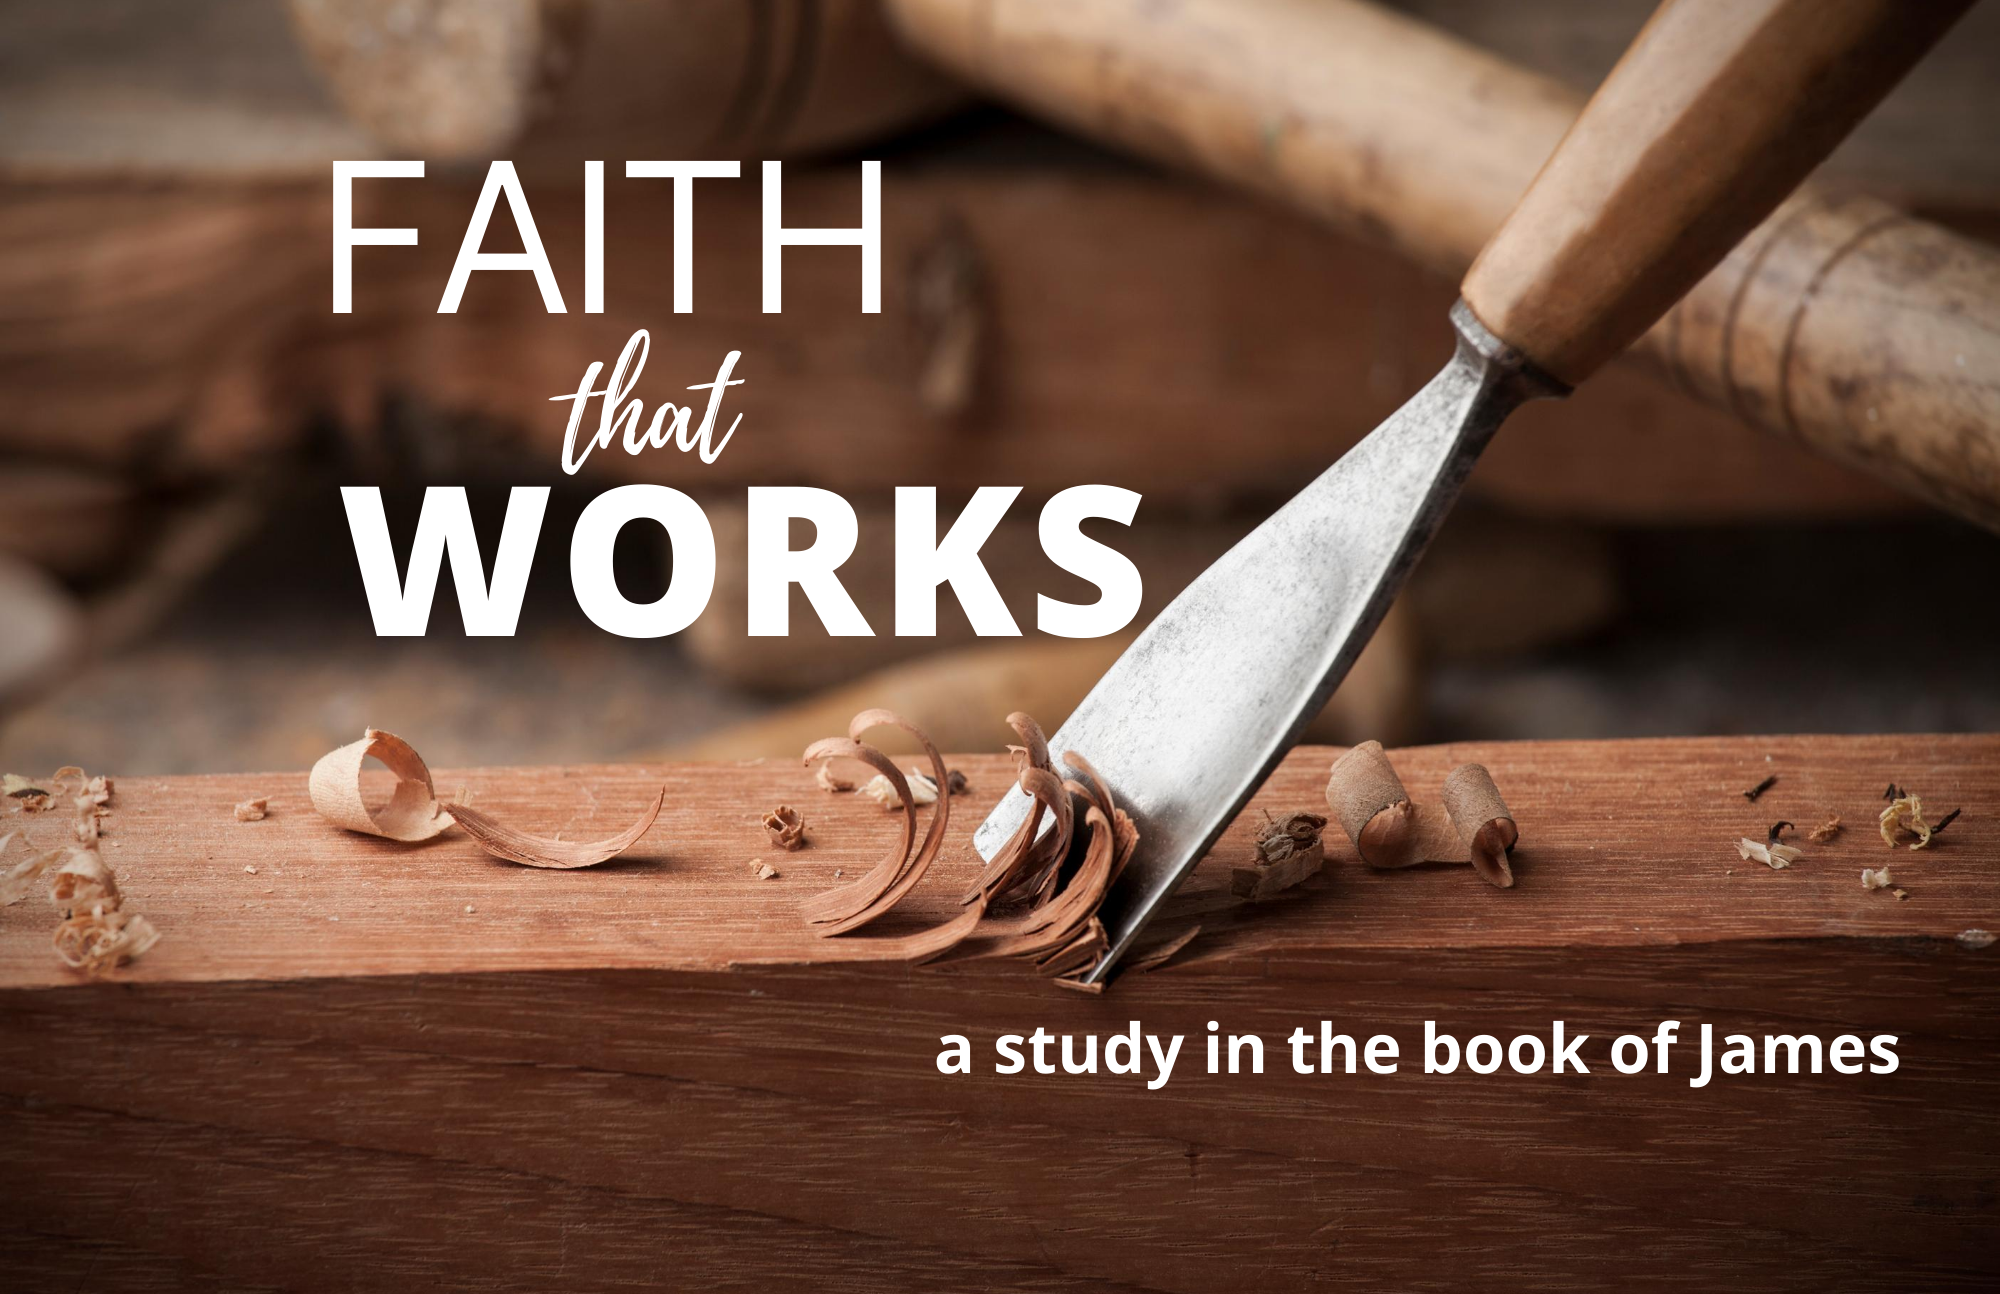 Faith that Works to Fight Temptation